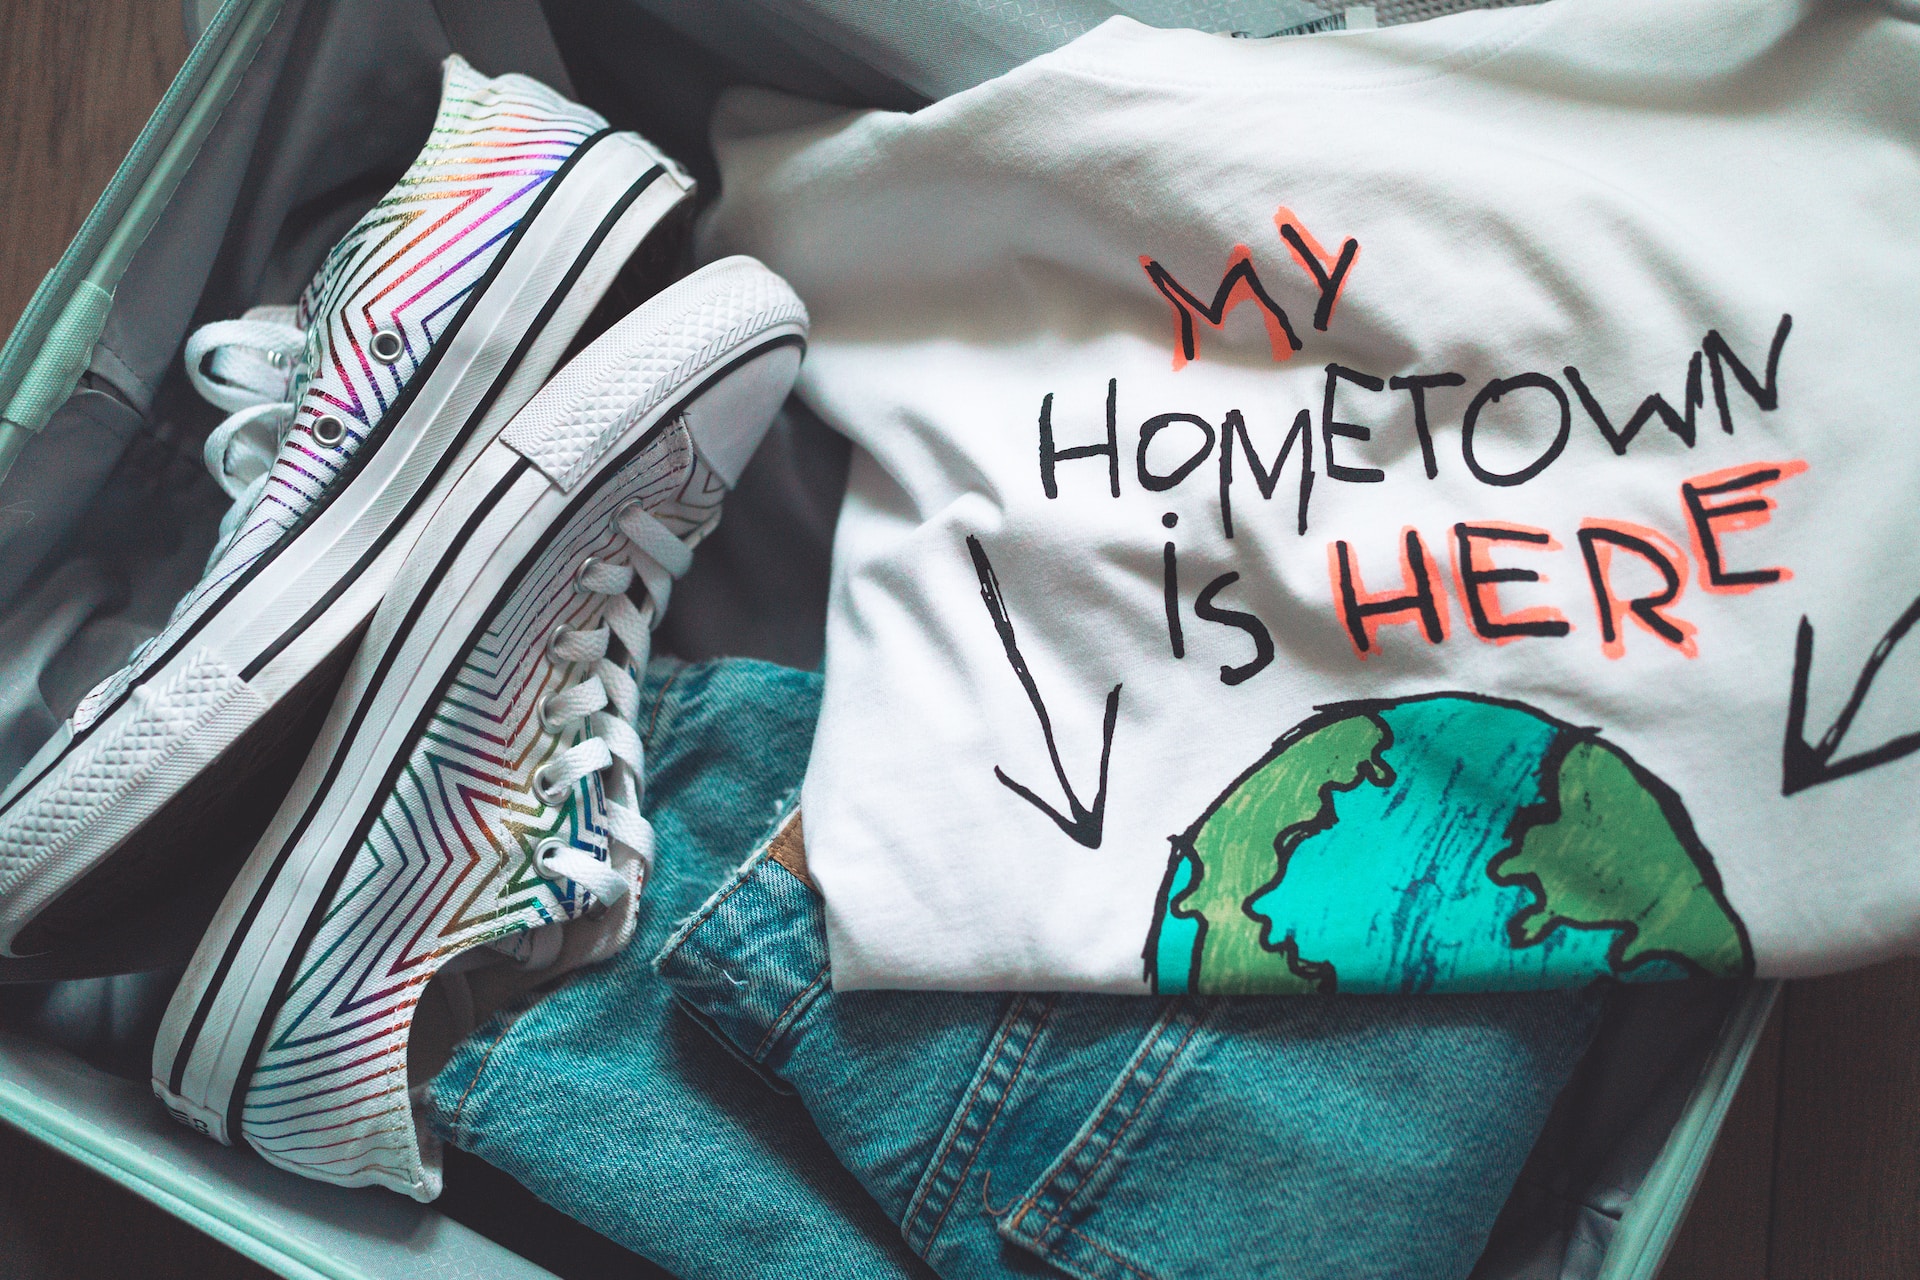 t-shirt in suitcase with image of globe and the words my hometown is here with arrows pointing to the ocean